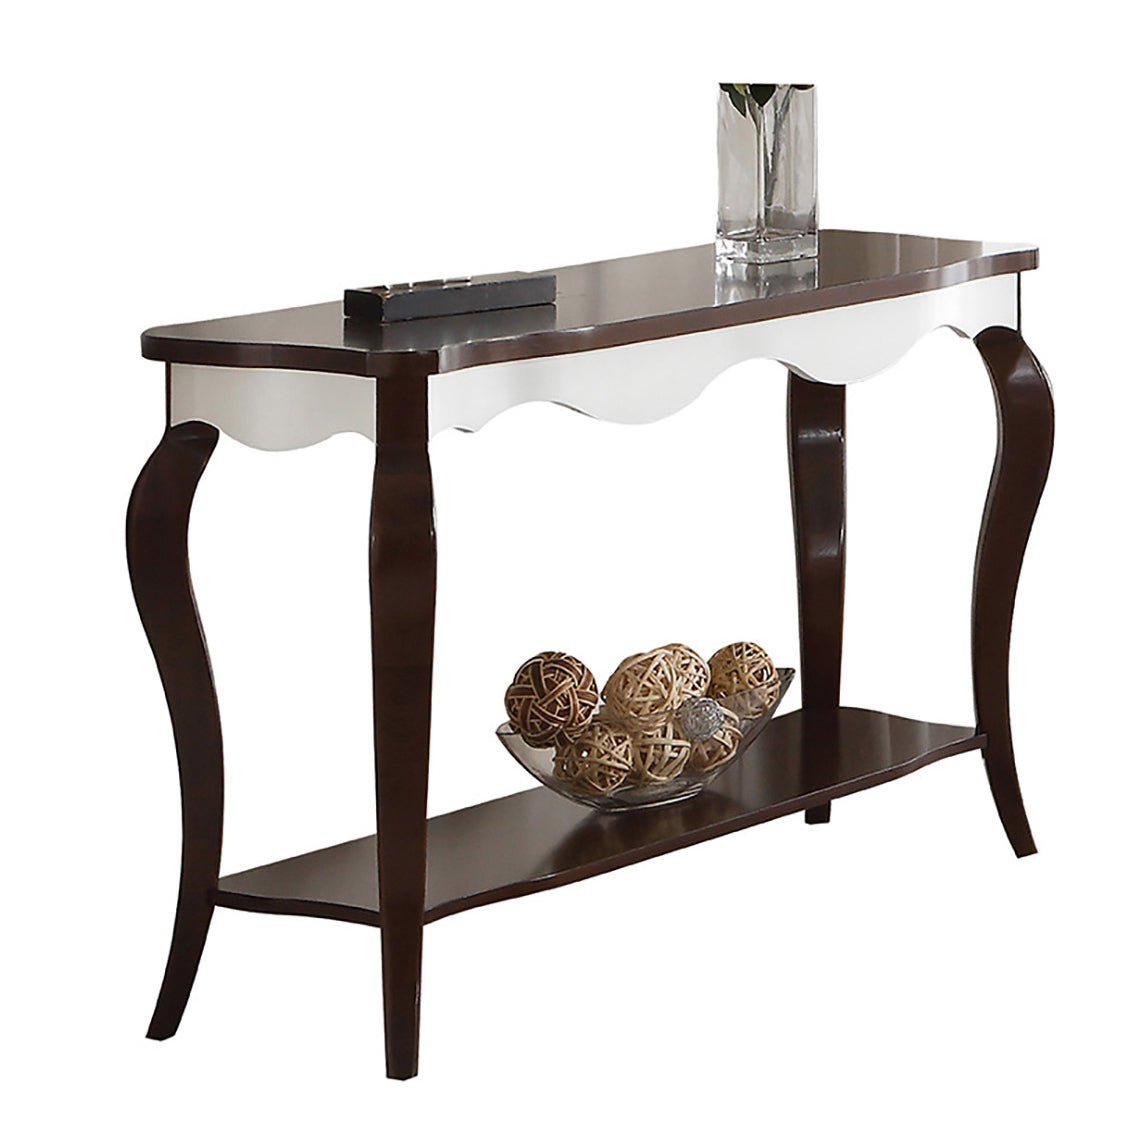 Walnut And White Sofa Table With Cabriole Leg -